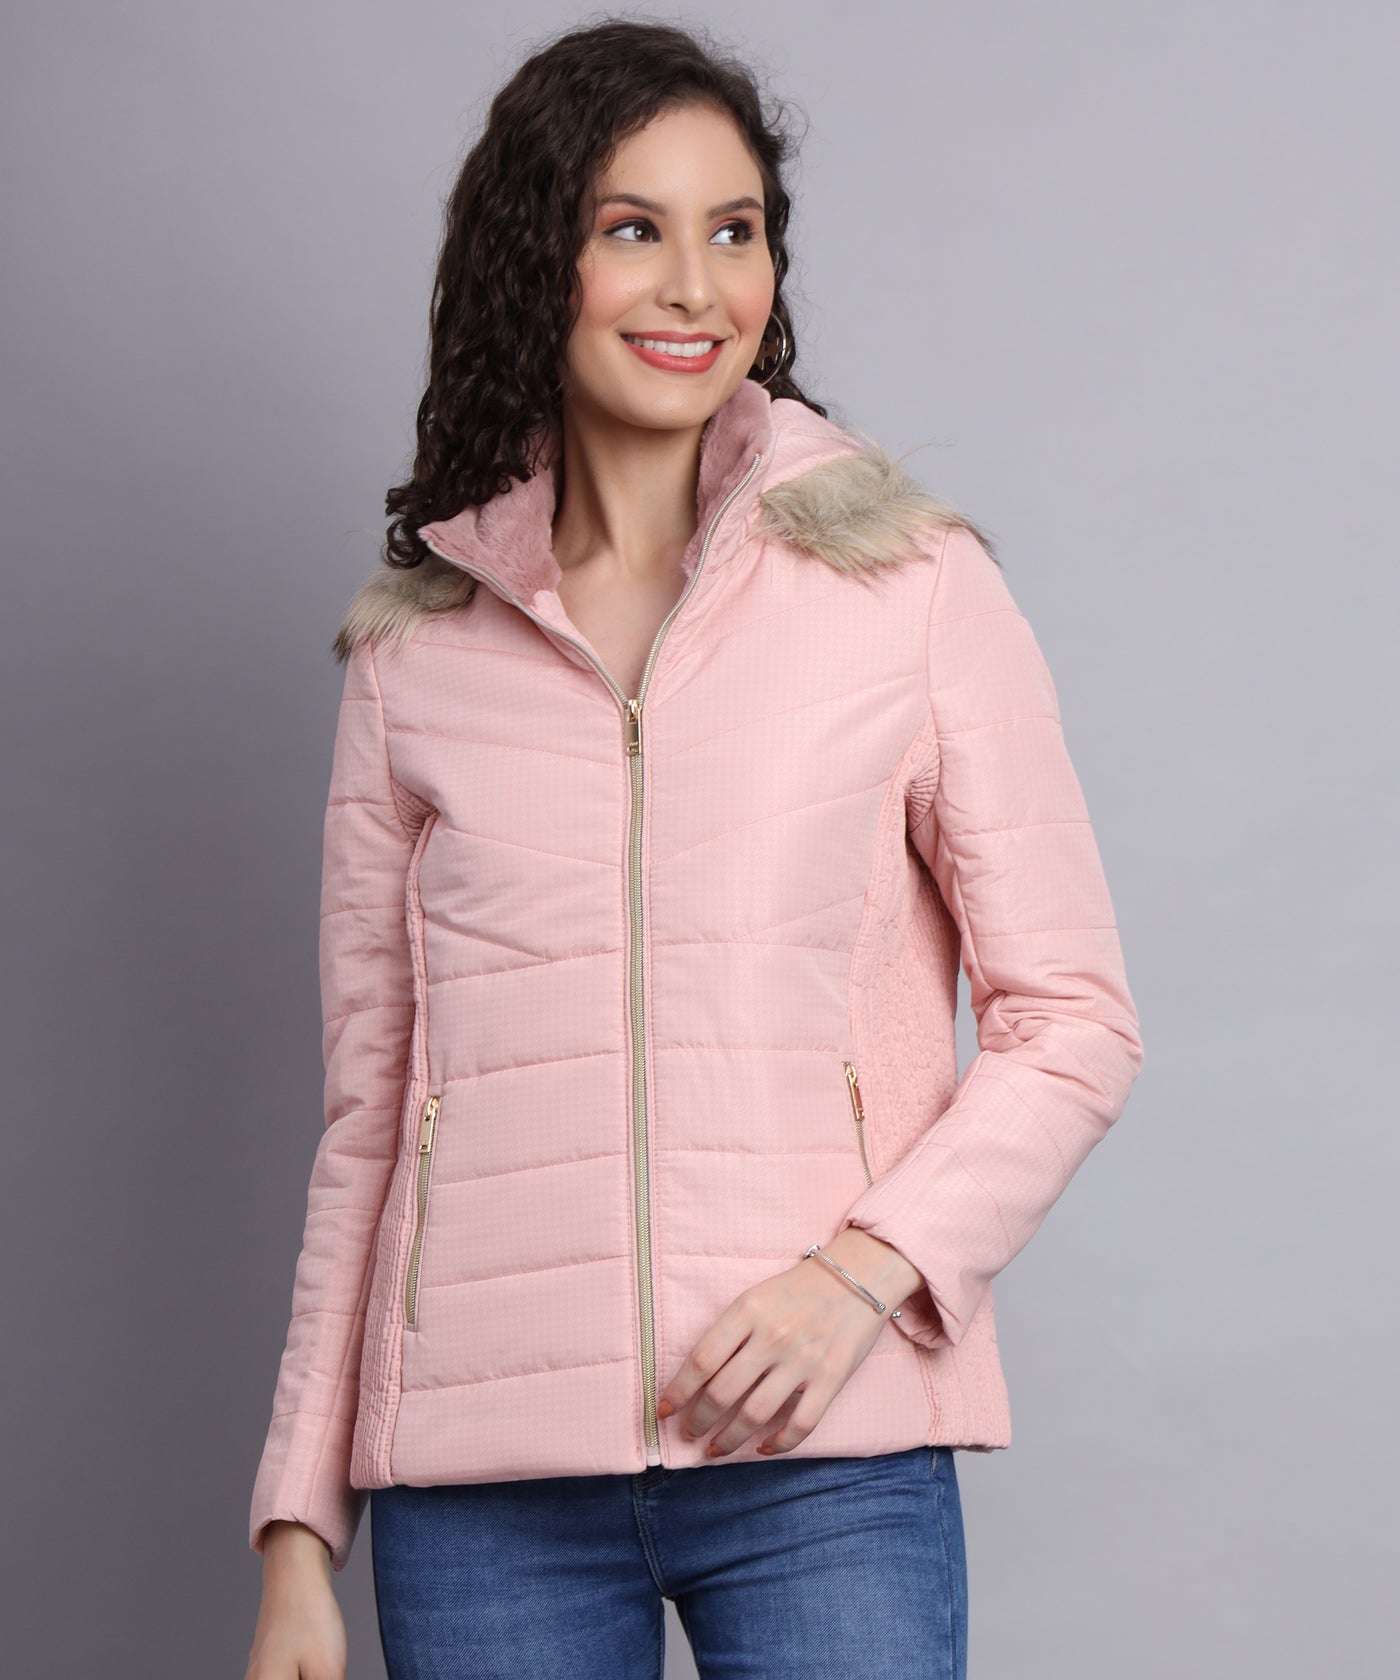 Pink shell quilted jacket- AW6106